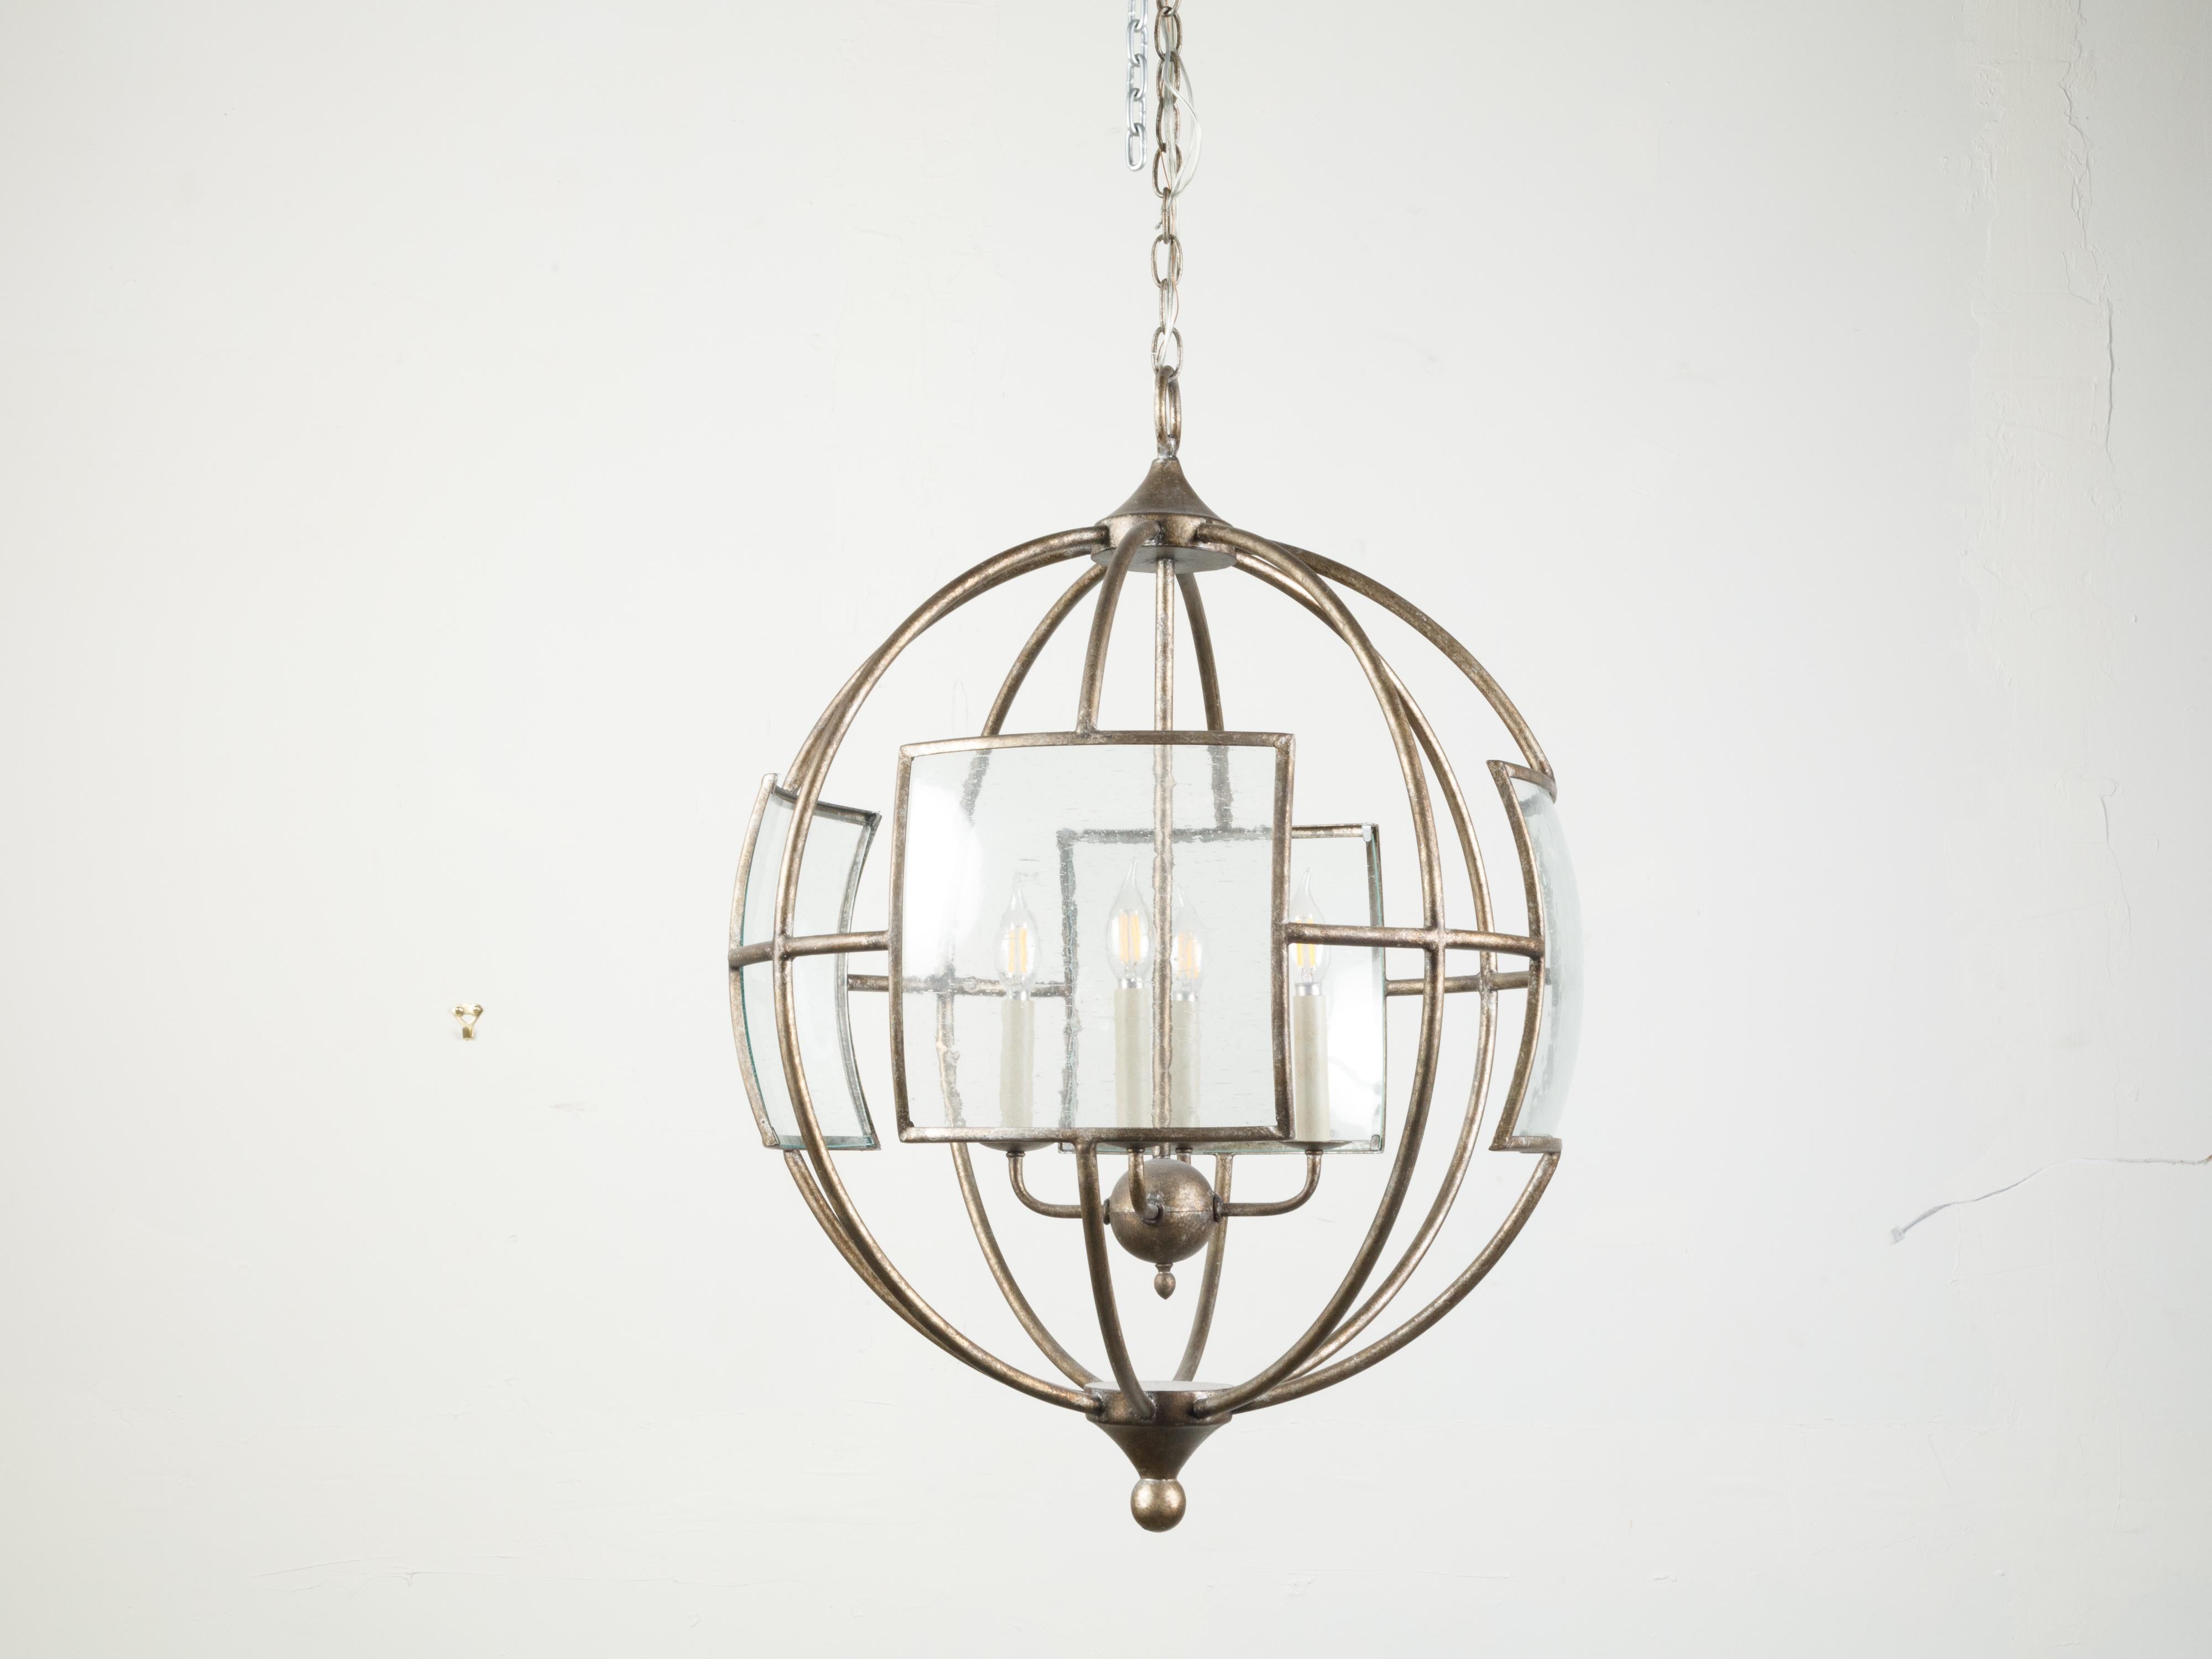 An Italian vintage spherical iron chandelier from the mid 20th century, with four lights and glass panels. Created in Italy during the midcentury period, this iron chandelier captures our attention with its spherical iron structure accented with